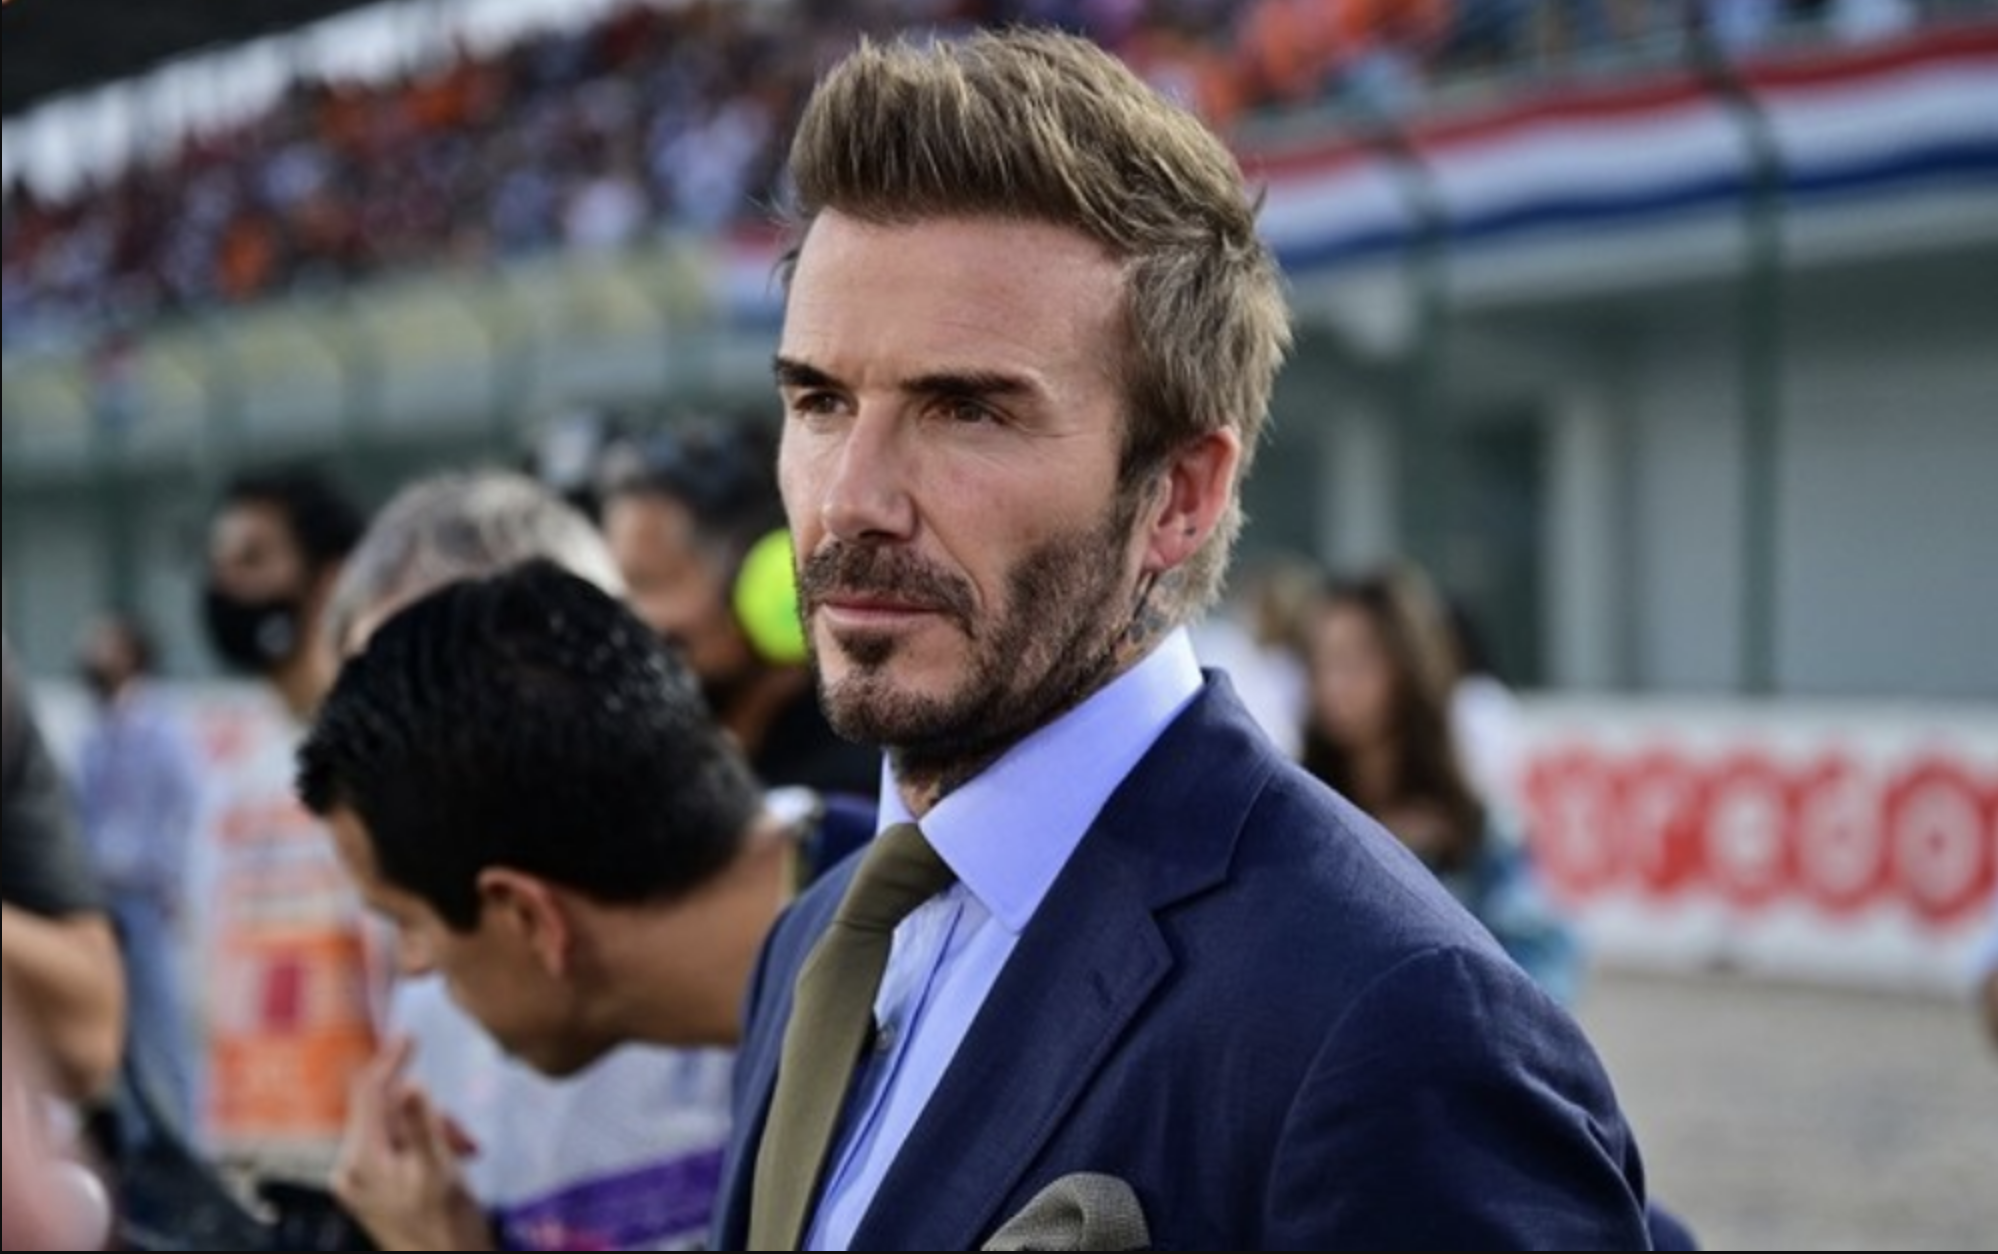 David Beckham hair transplant? Many will agree that his youthful looks owe much to his healthy hair (ctto, arabnews.com)